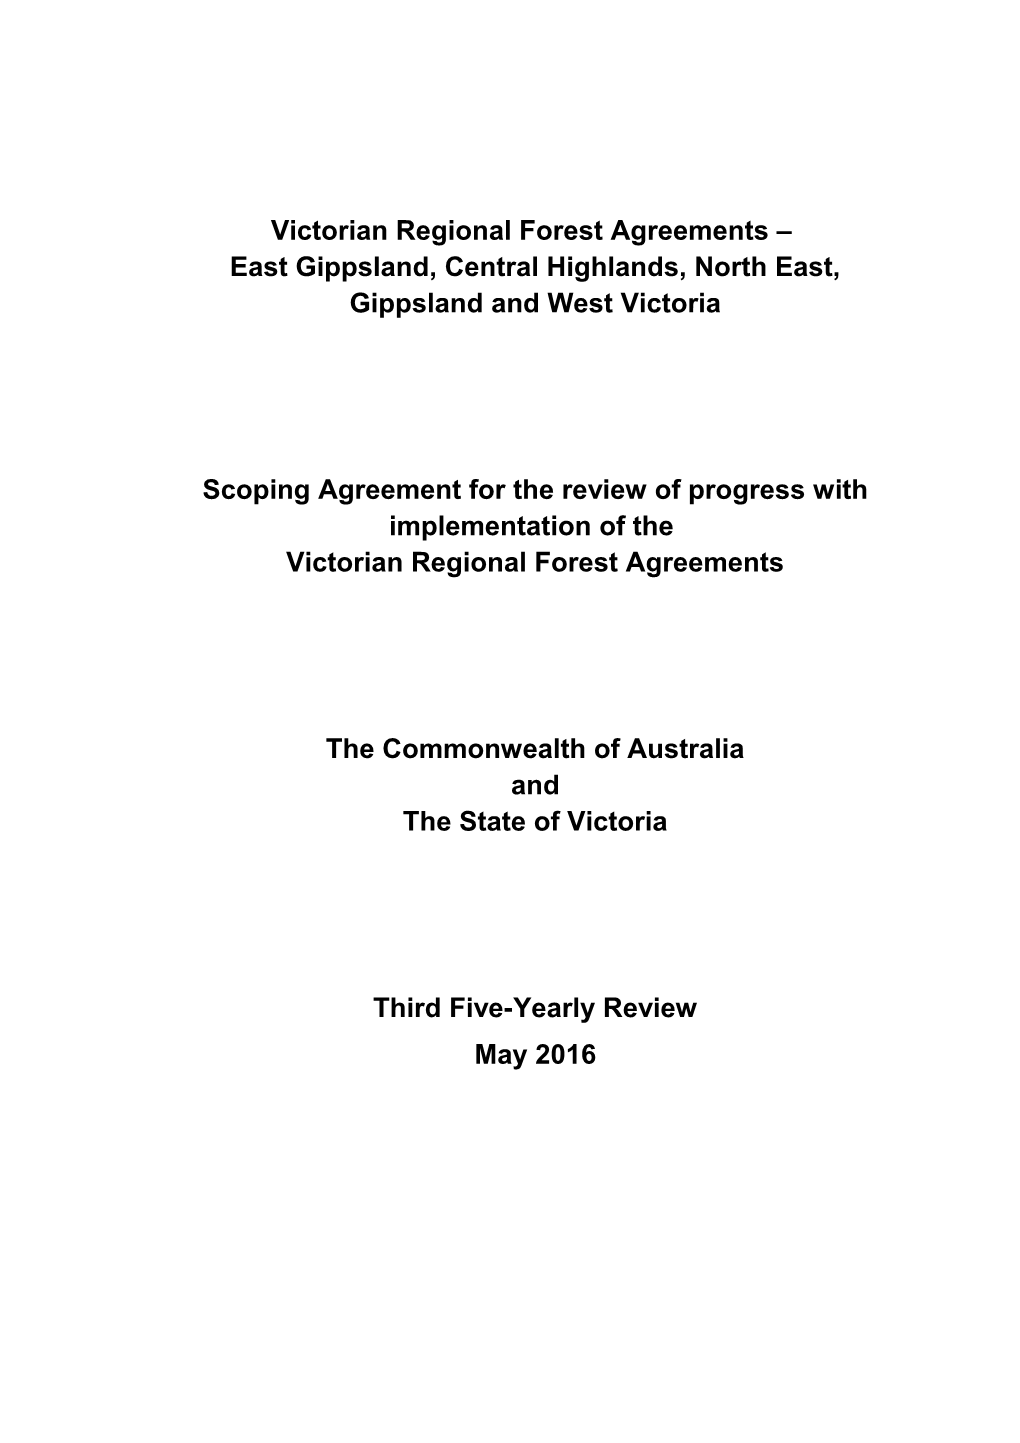 Scoping Agreement for the Review of Progress with Implementation of the Victorian Regional